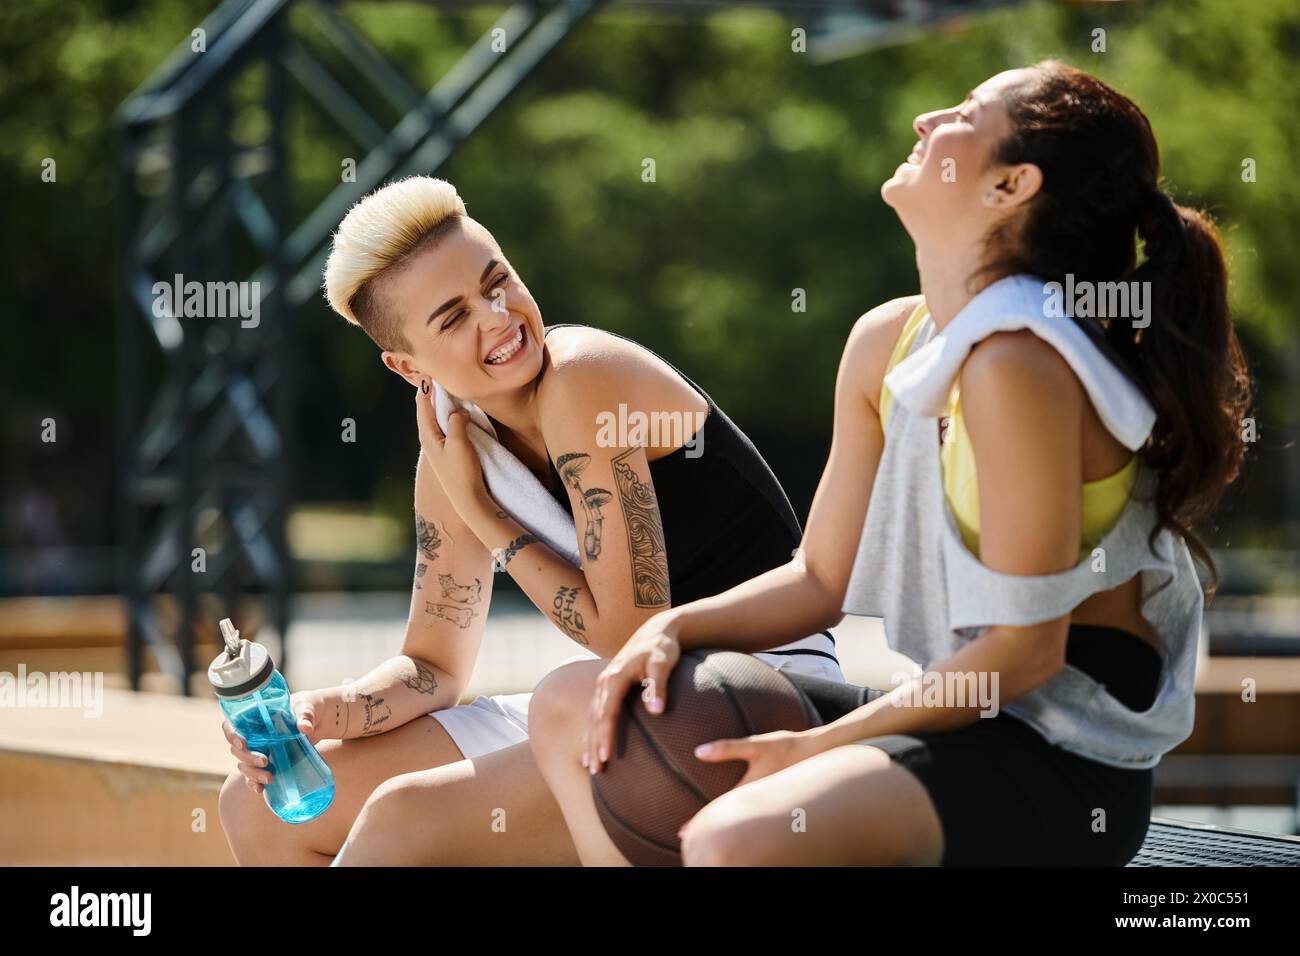 Two young women sitting together after playing basketball outdoors, enjoying a moment of friendship and camaraderie. Stock Photo